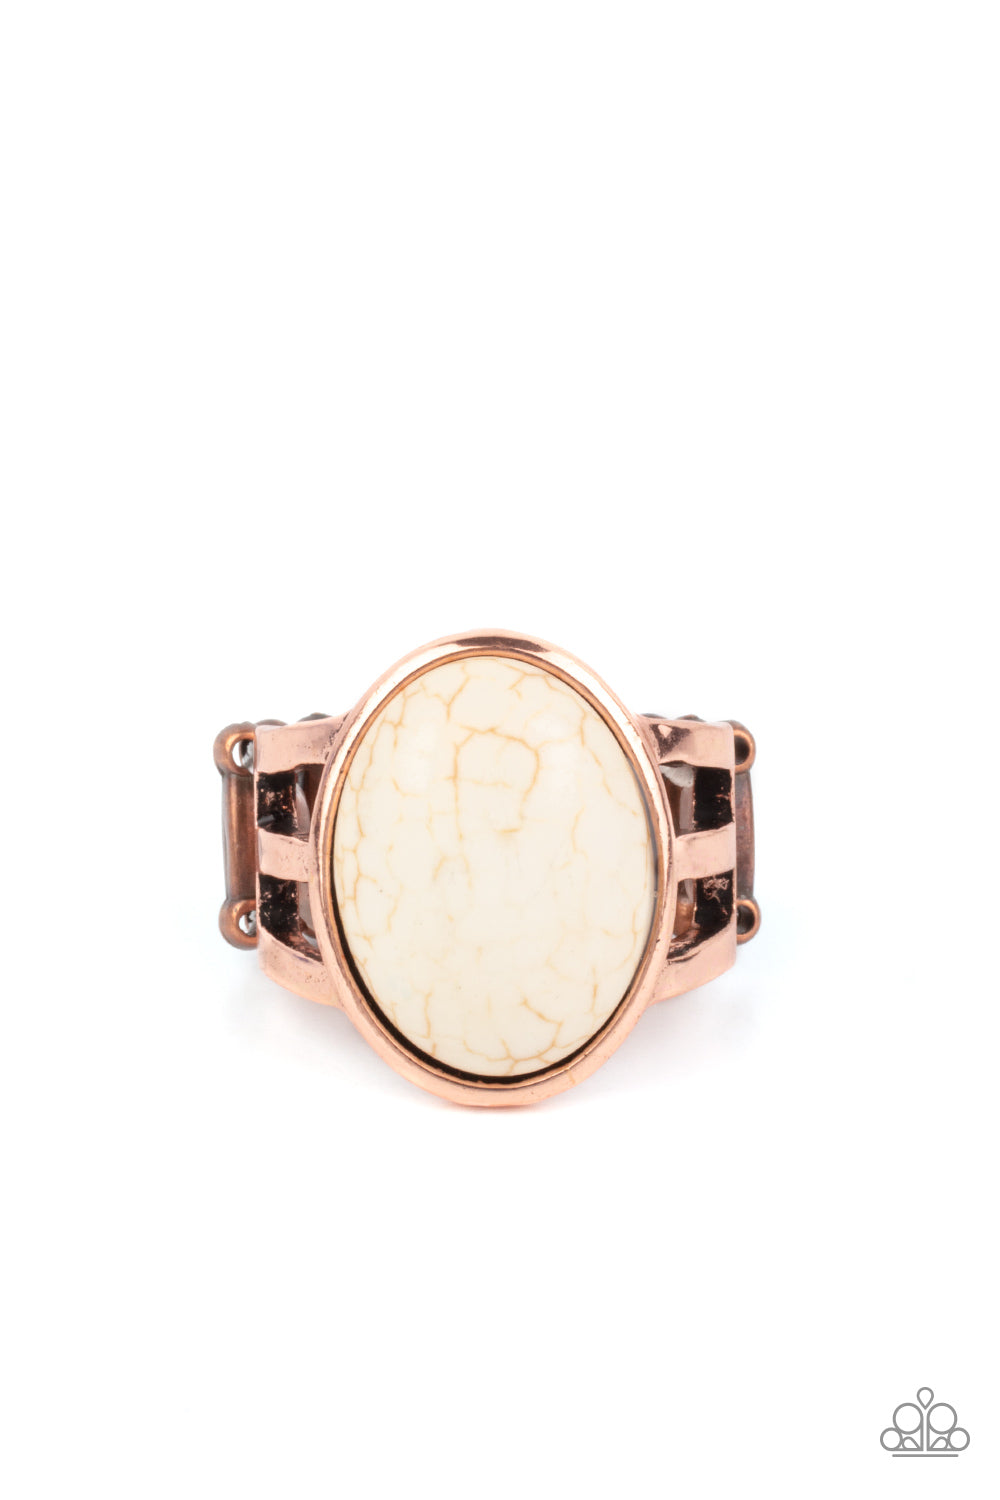 Divine Deserts Copper Ring - Paparazzi Accessories.  An oval white stone is nestled inside an antiqued copper frame that attaches to layered copper bands, creating a rustic stone centerpiece atop the finger. Features a stretchy band for a flexible fit.  ﻿﻿﻿All Paparazzi Accessories are lead free and nickel free!  Sold as one individual ring.